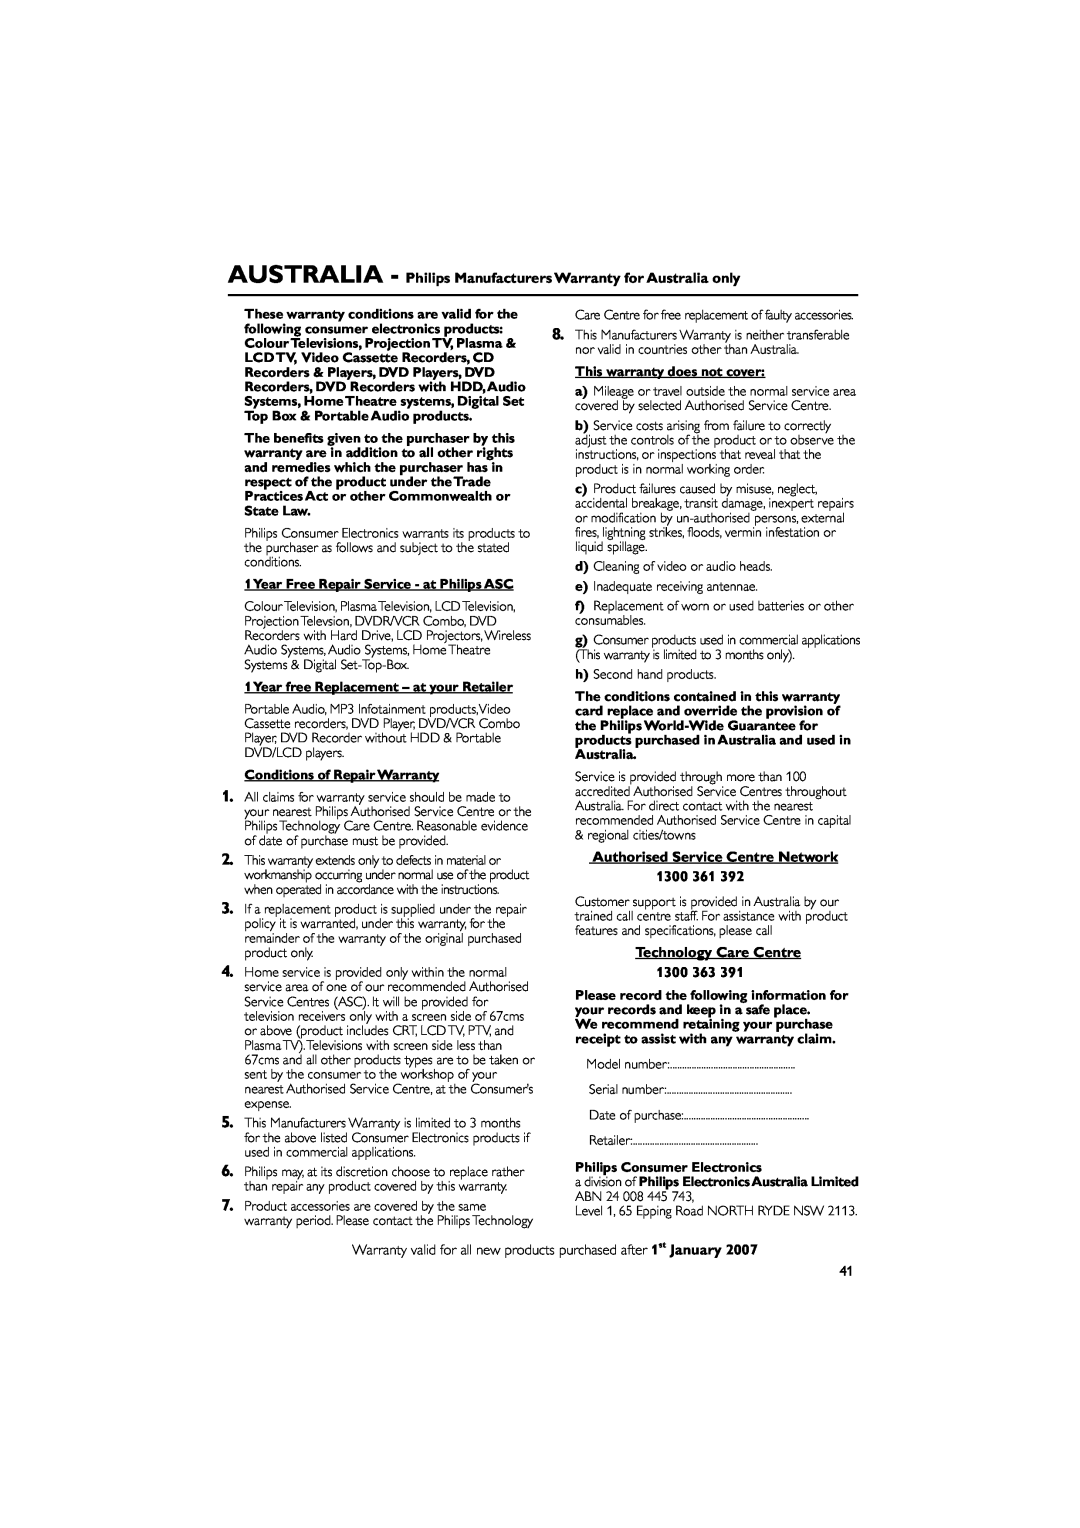 Philips PDCC-JH-0811 user manual AUSTRALIA - Philips Manufacturers Warranty for Australia only, Technology Care Centre 1300 